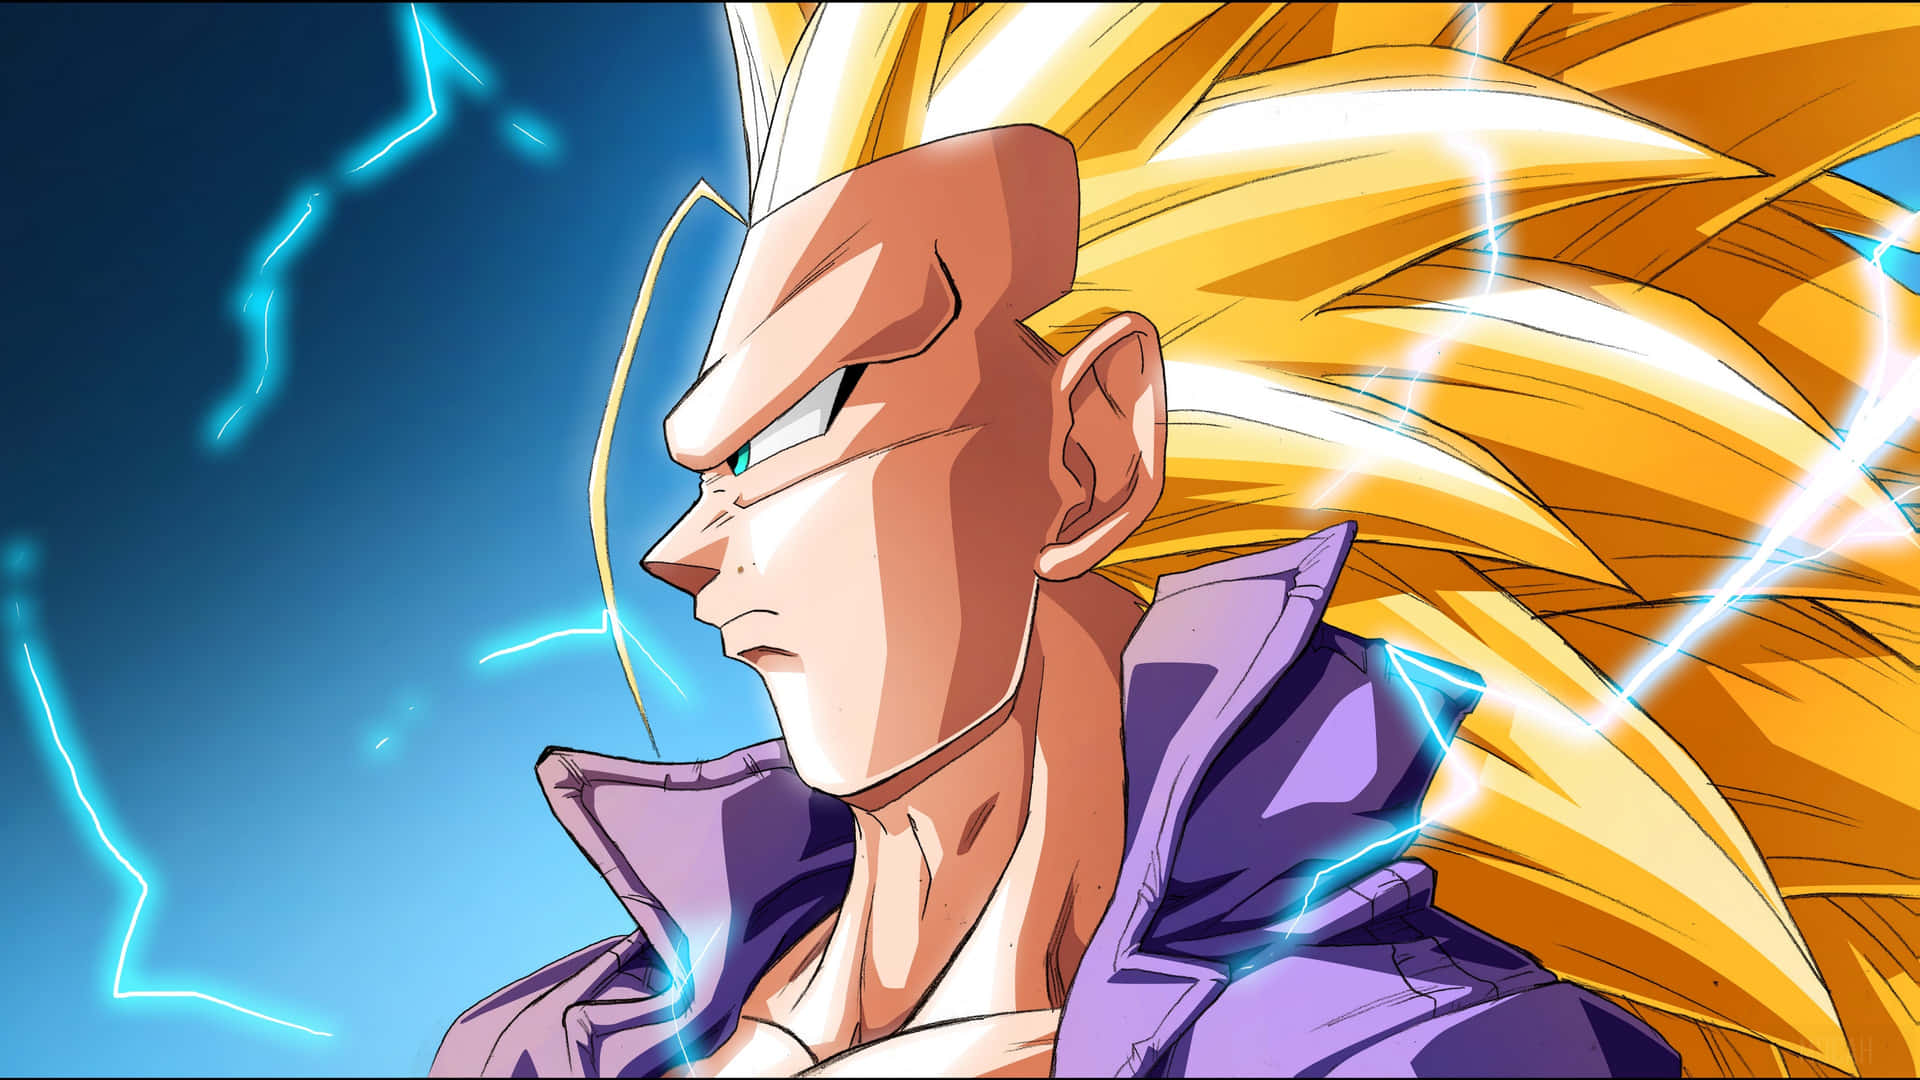 Get Ready, Trunks is Ready to Take On the Enemy! Wallpaper